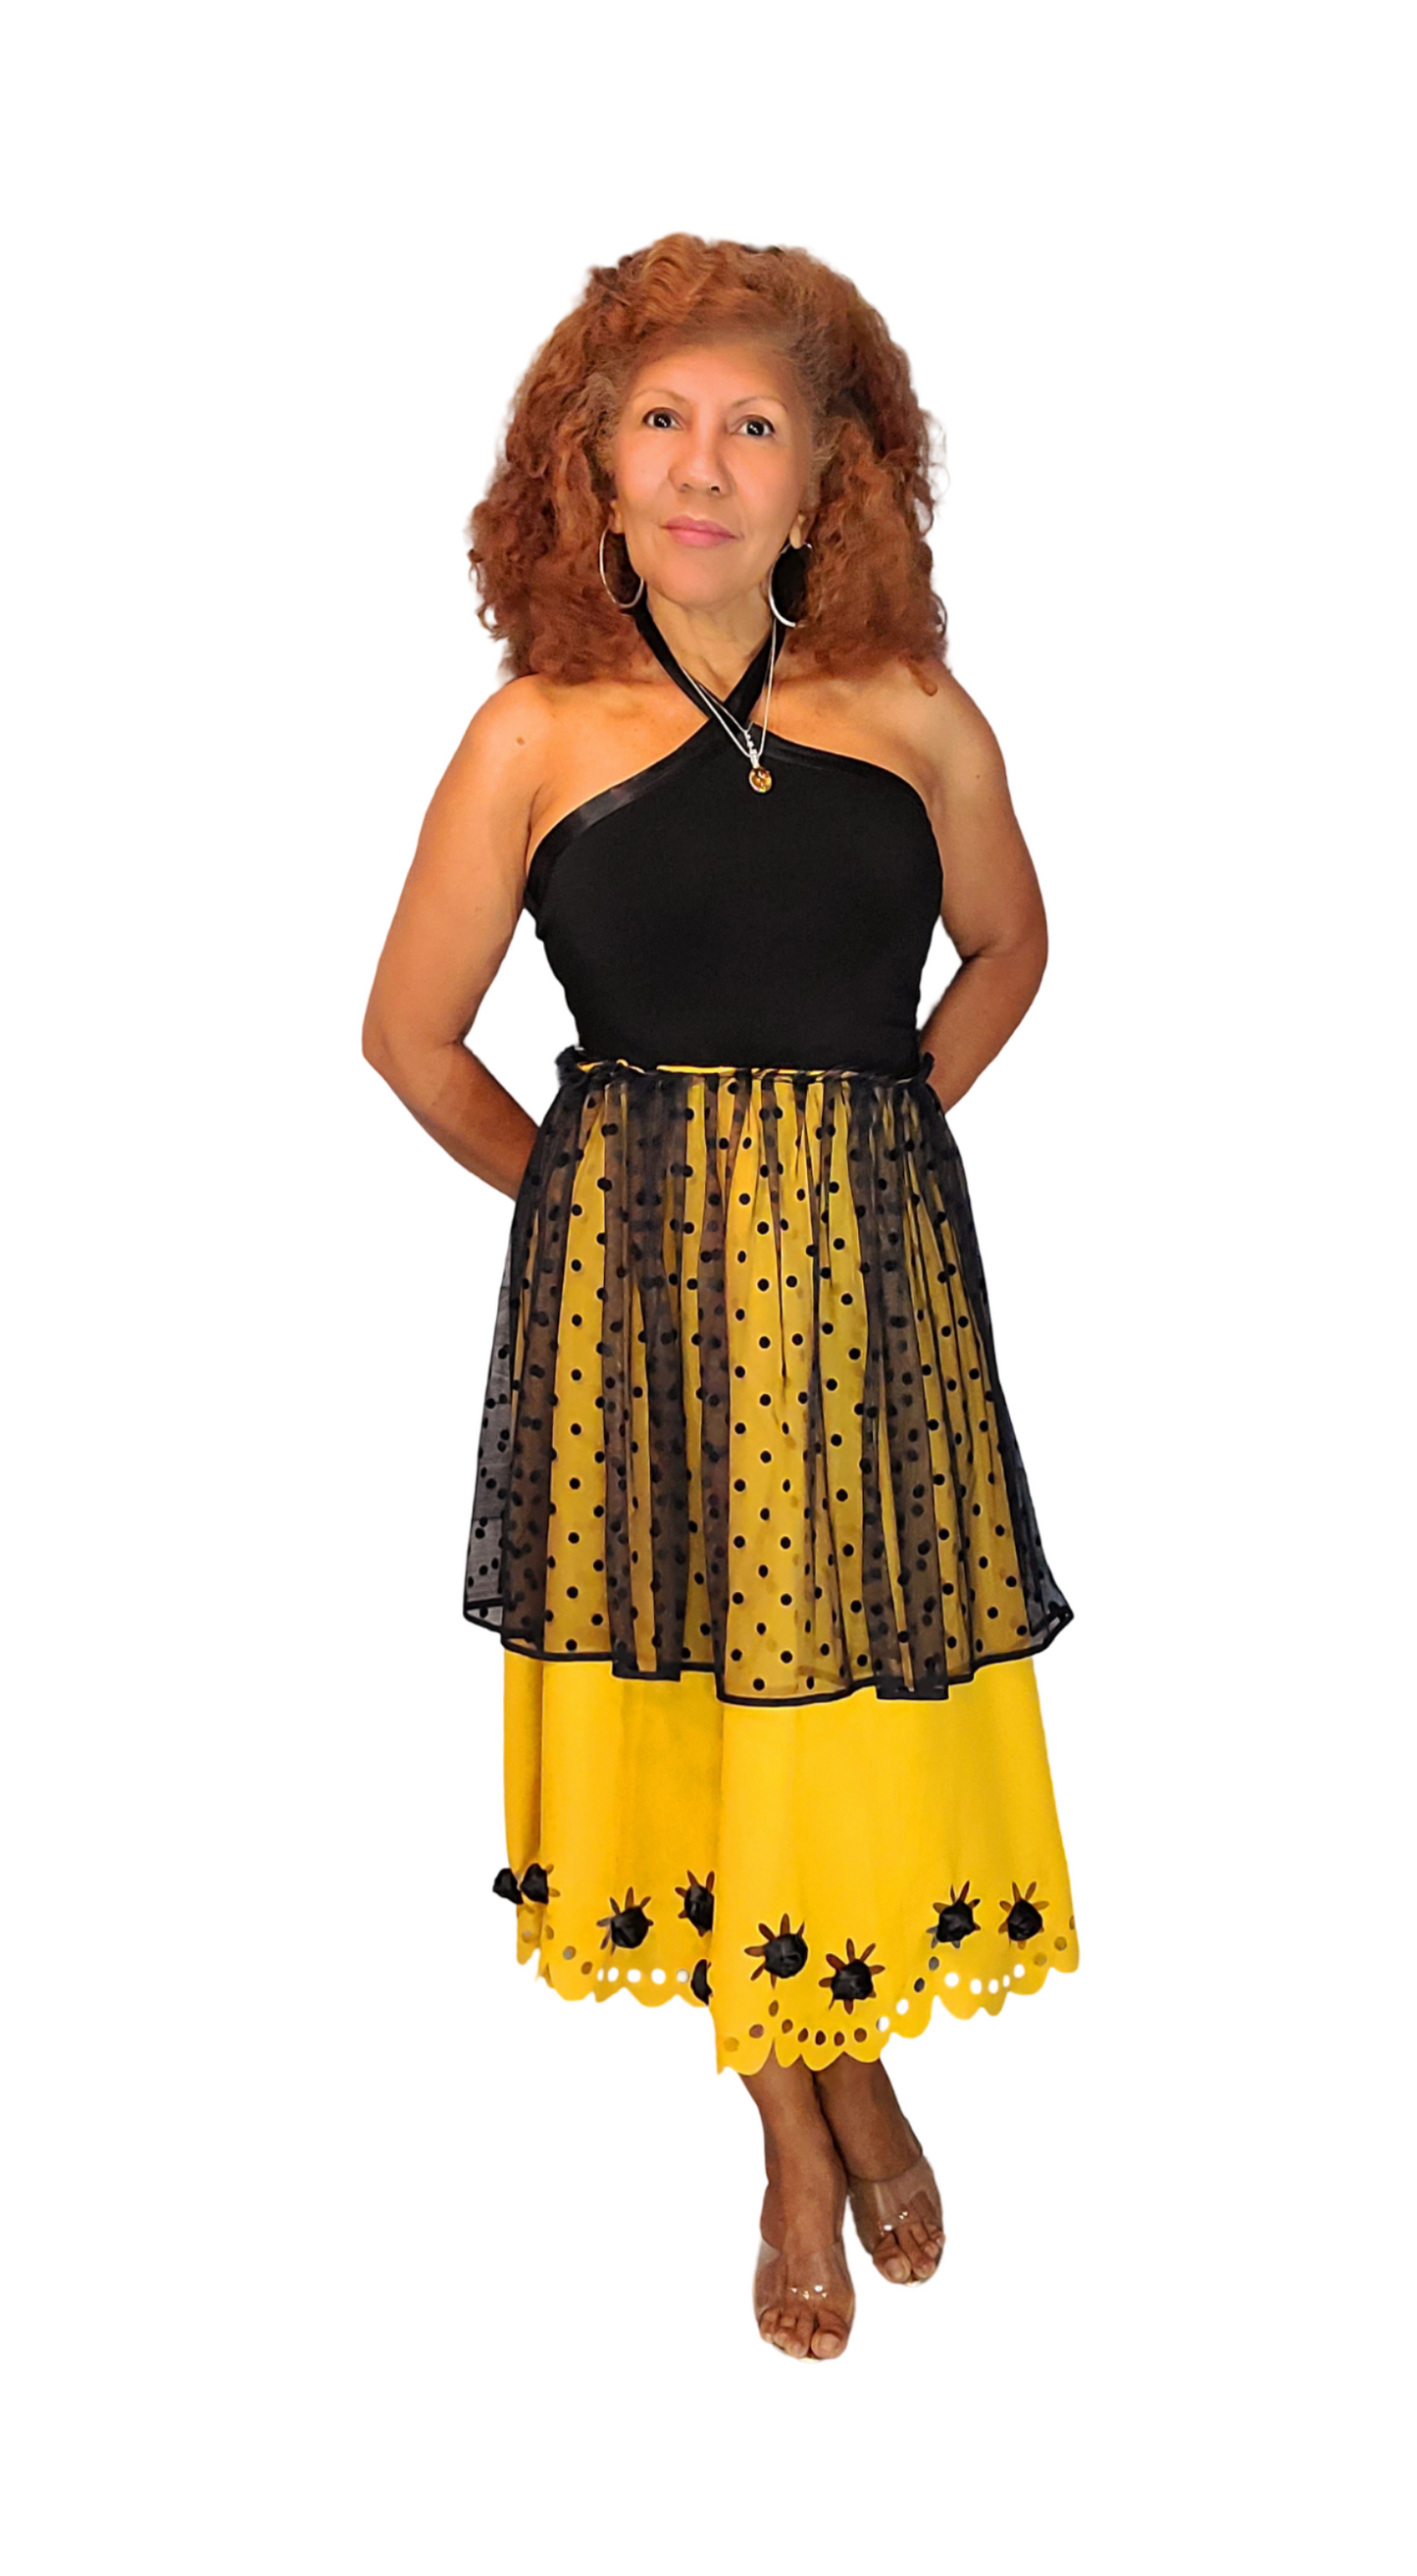 Summer Nights Dress Get ready to shine in our Summer Night Dress! This radiant yellow knee-length dress is perfect for warm summer evenings. The embellished dress features a beautifully adorned hem that will make you stand out in any crowd. Stay super